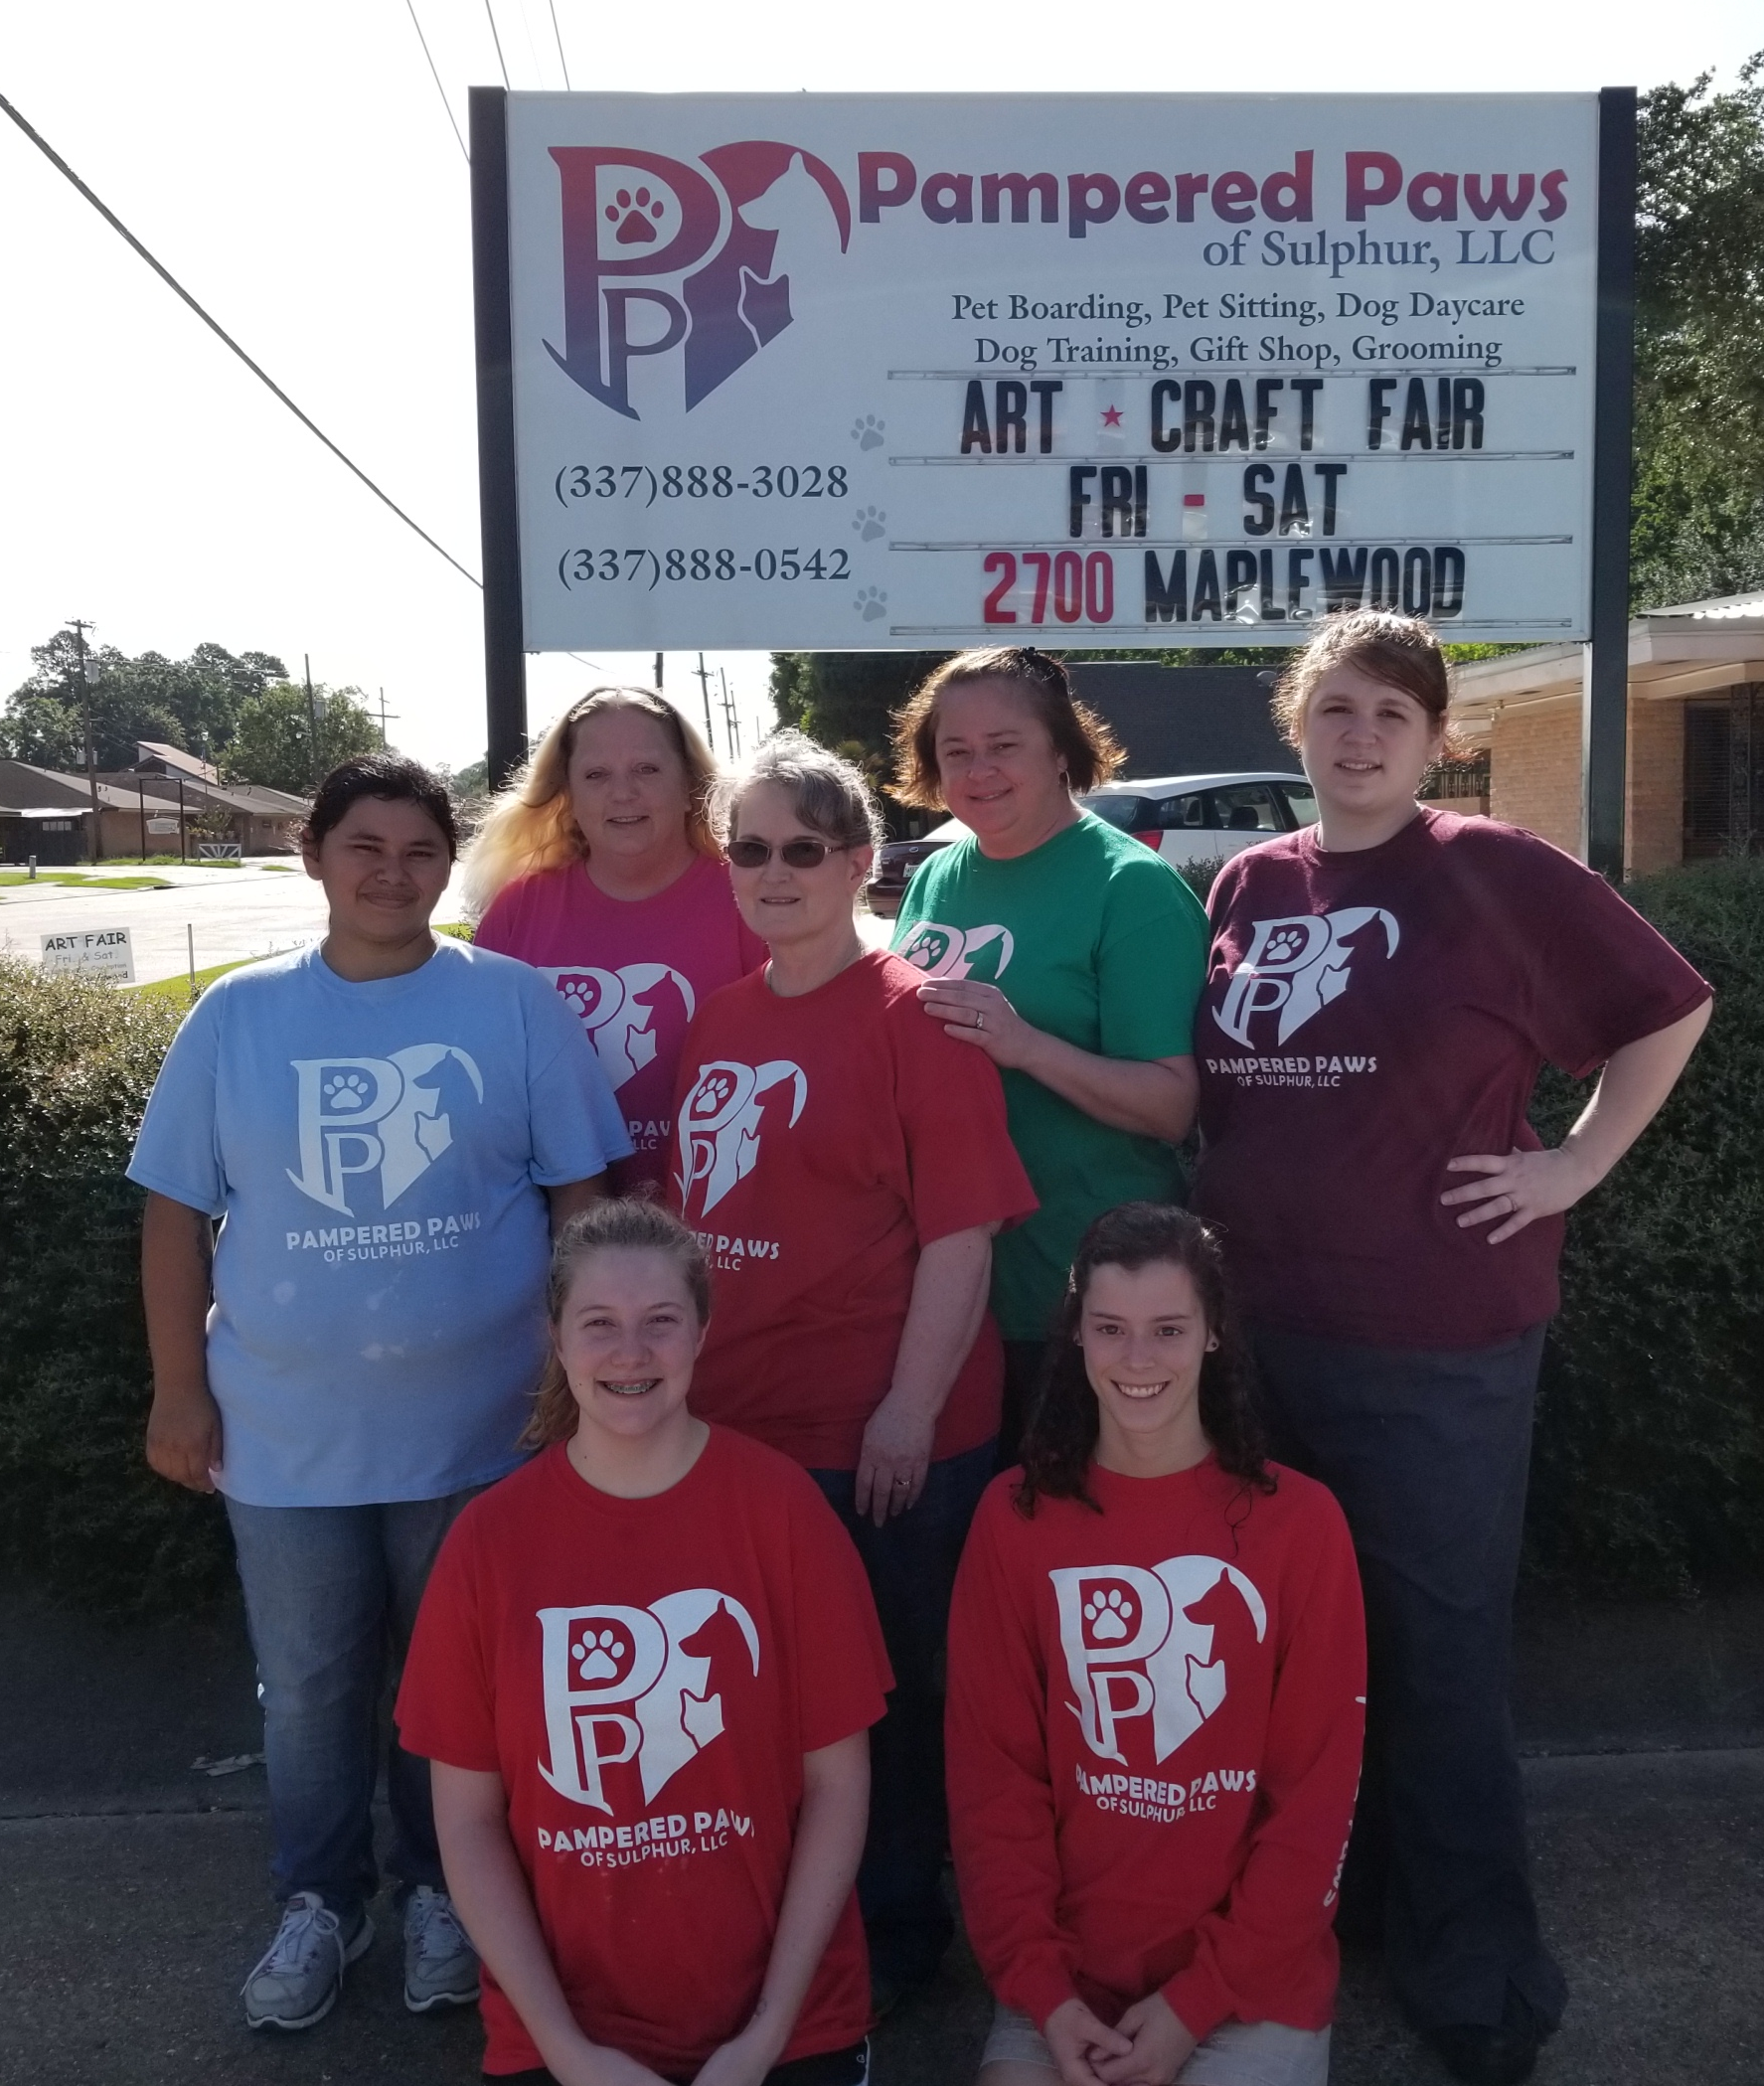 Pampered Paws opens for pets - Pampered Paws